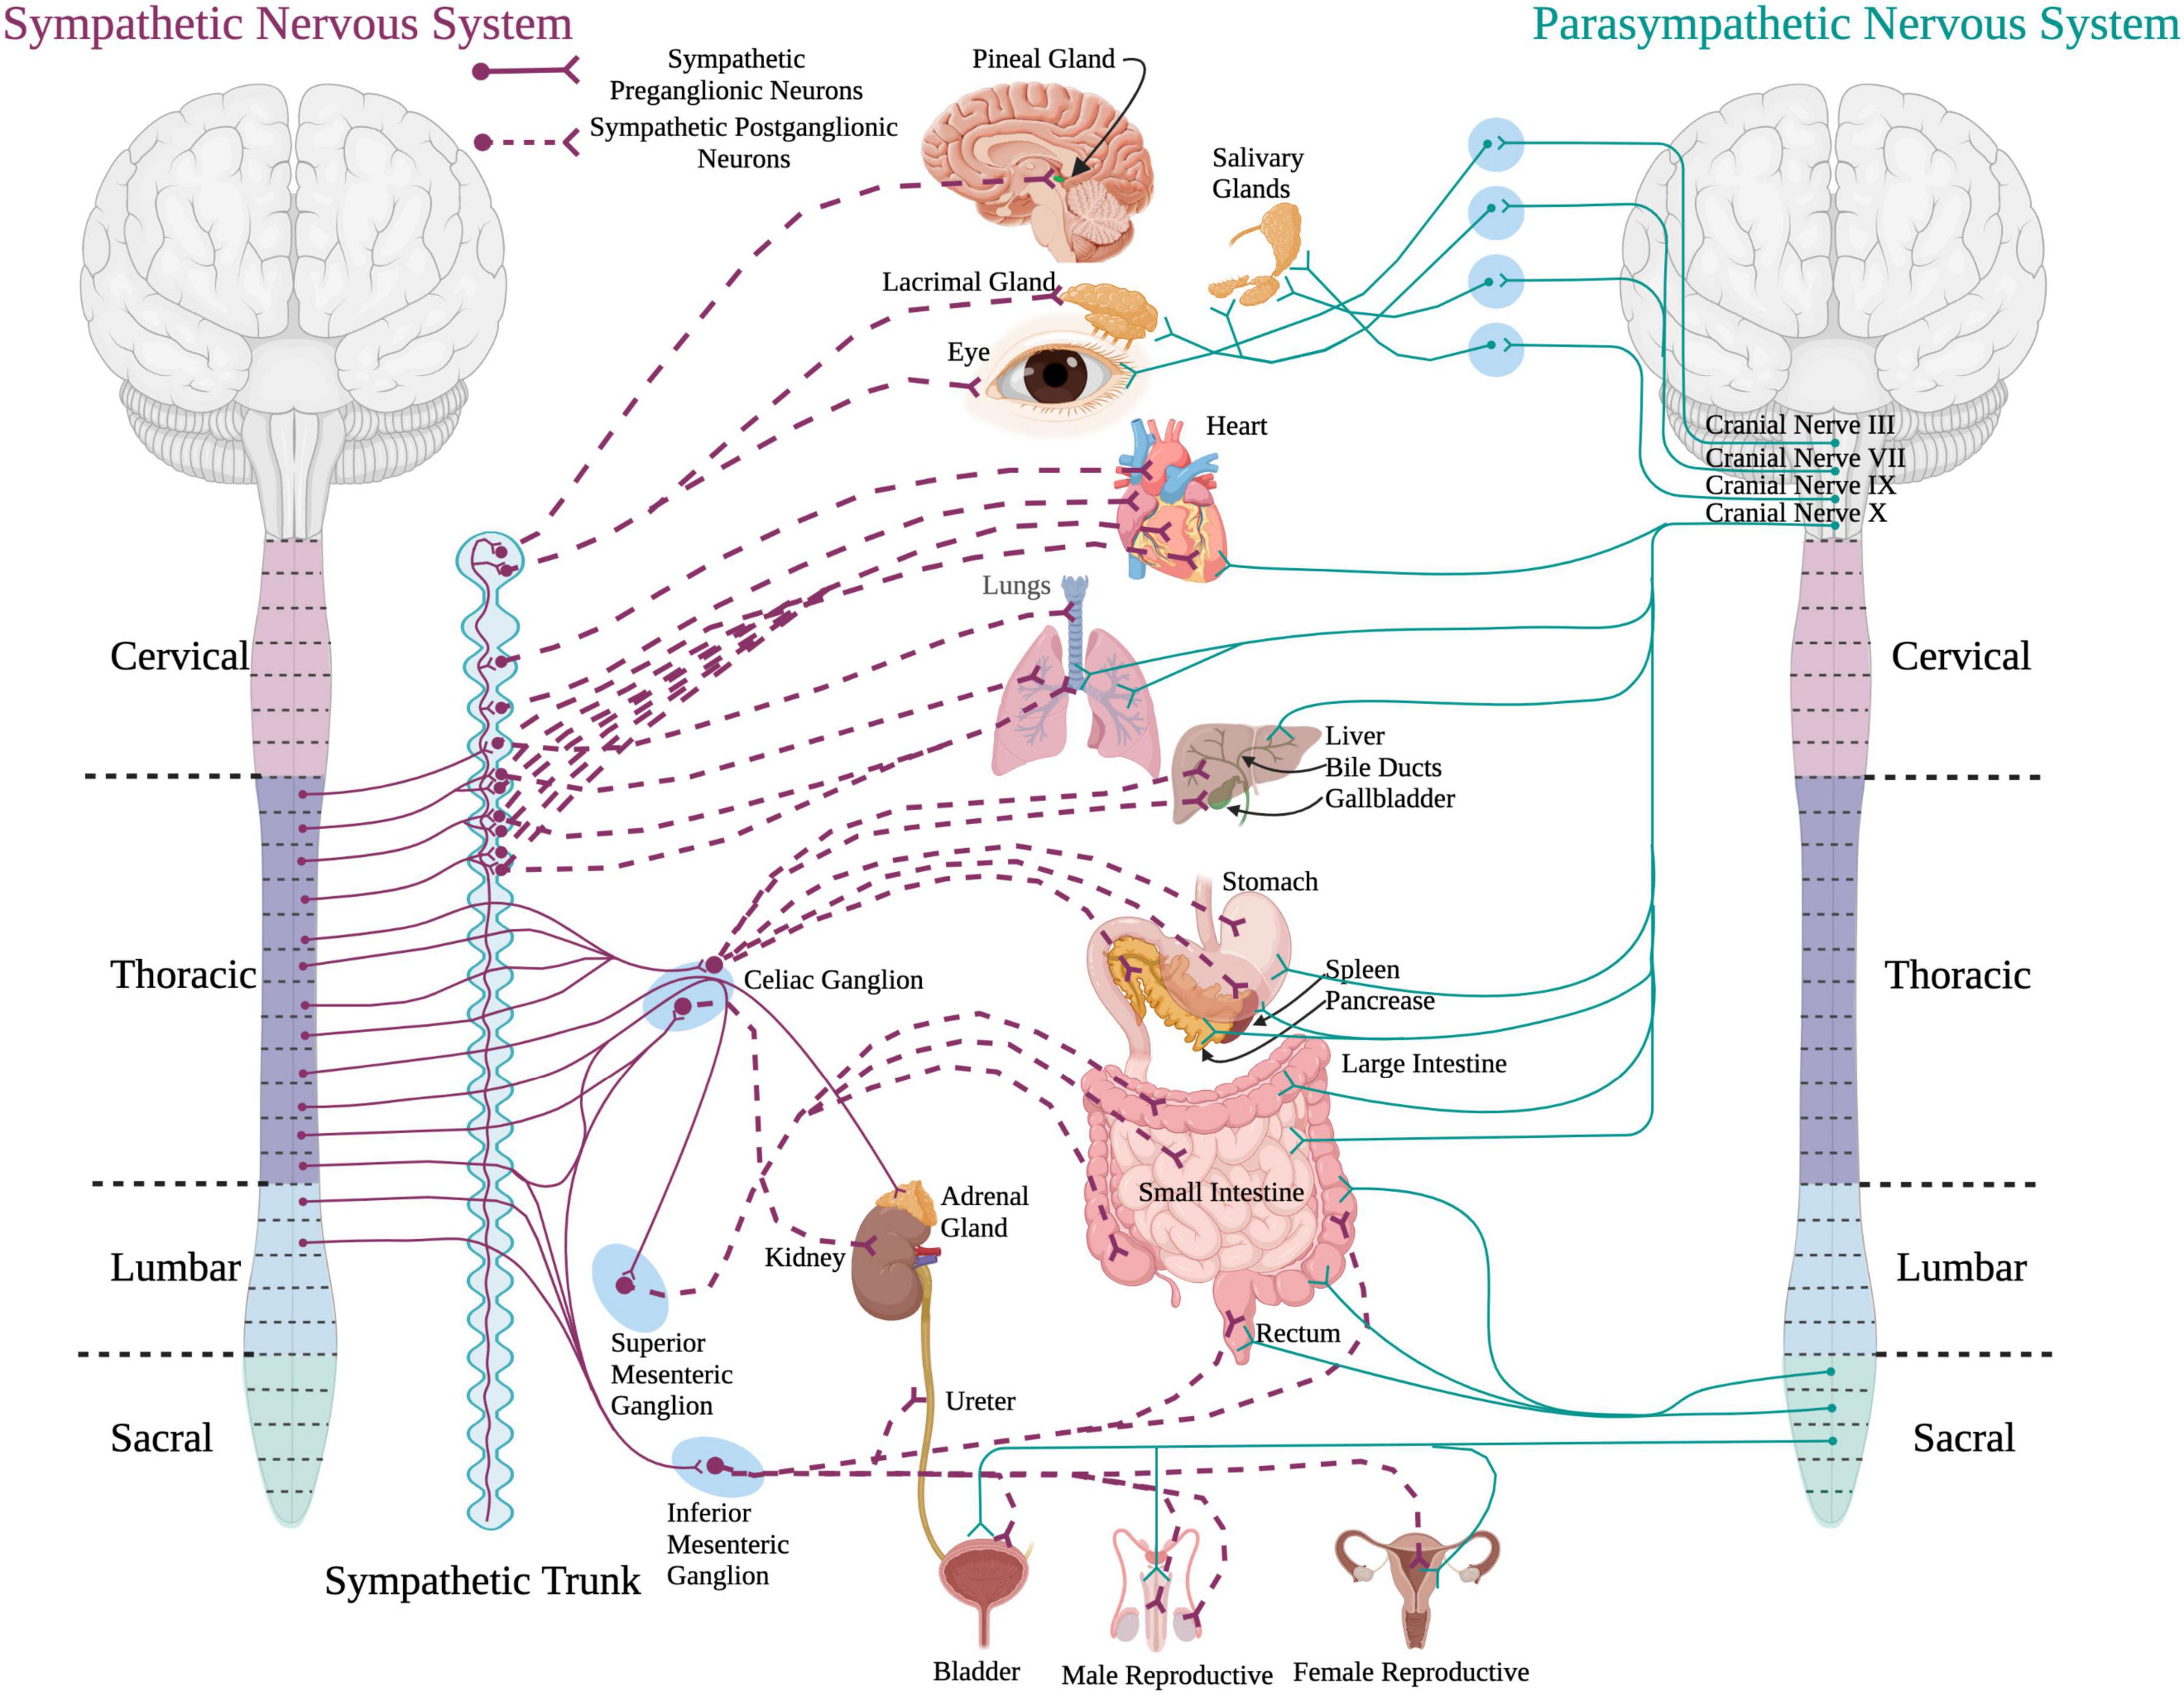 Consequences of spinal cord injury on the sympathetic nervous system